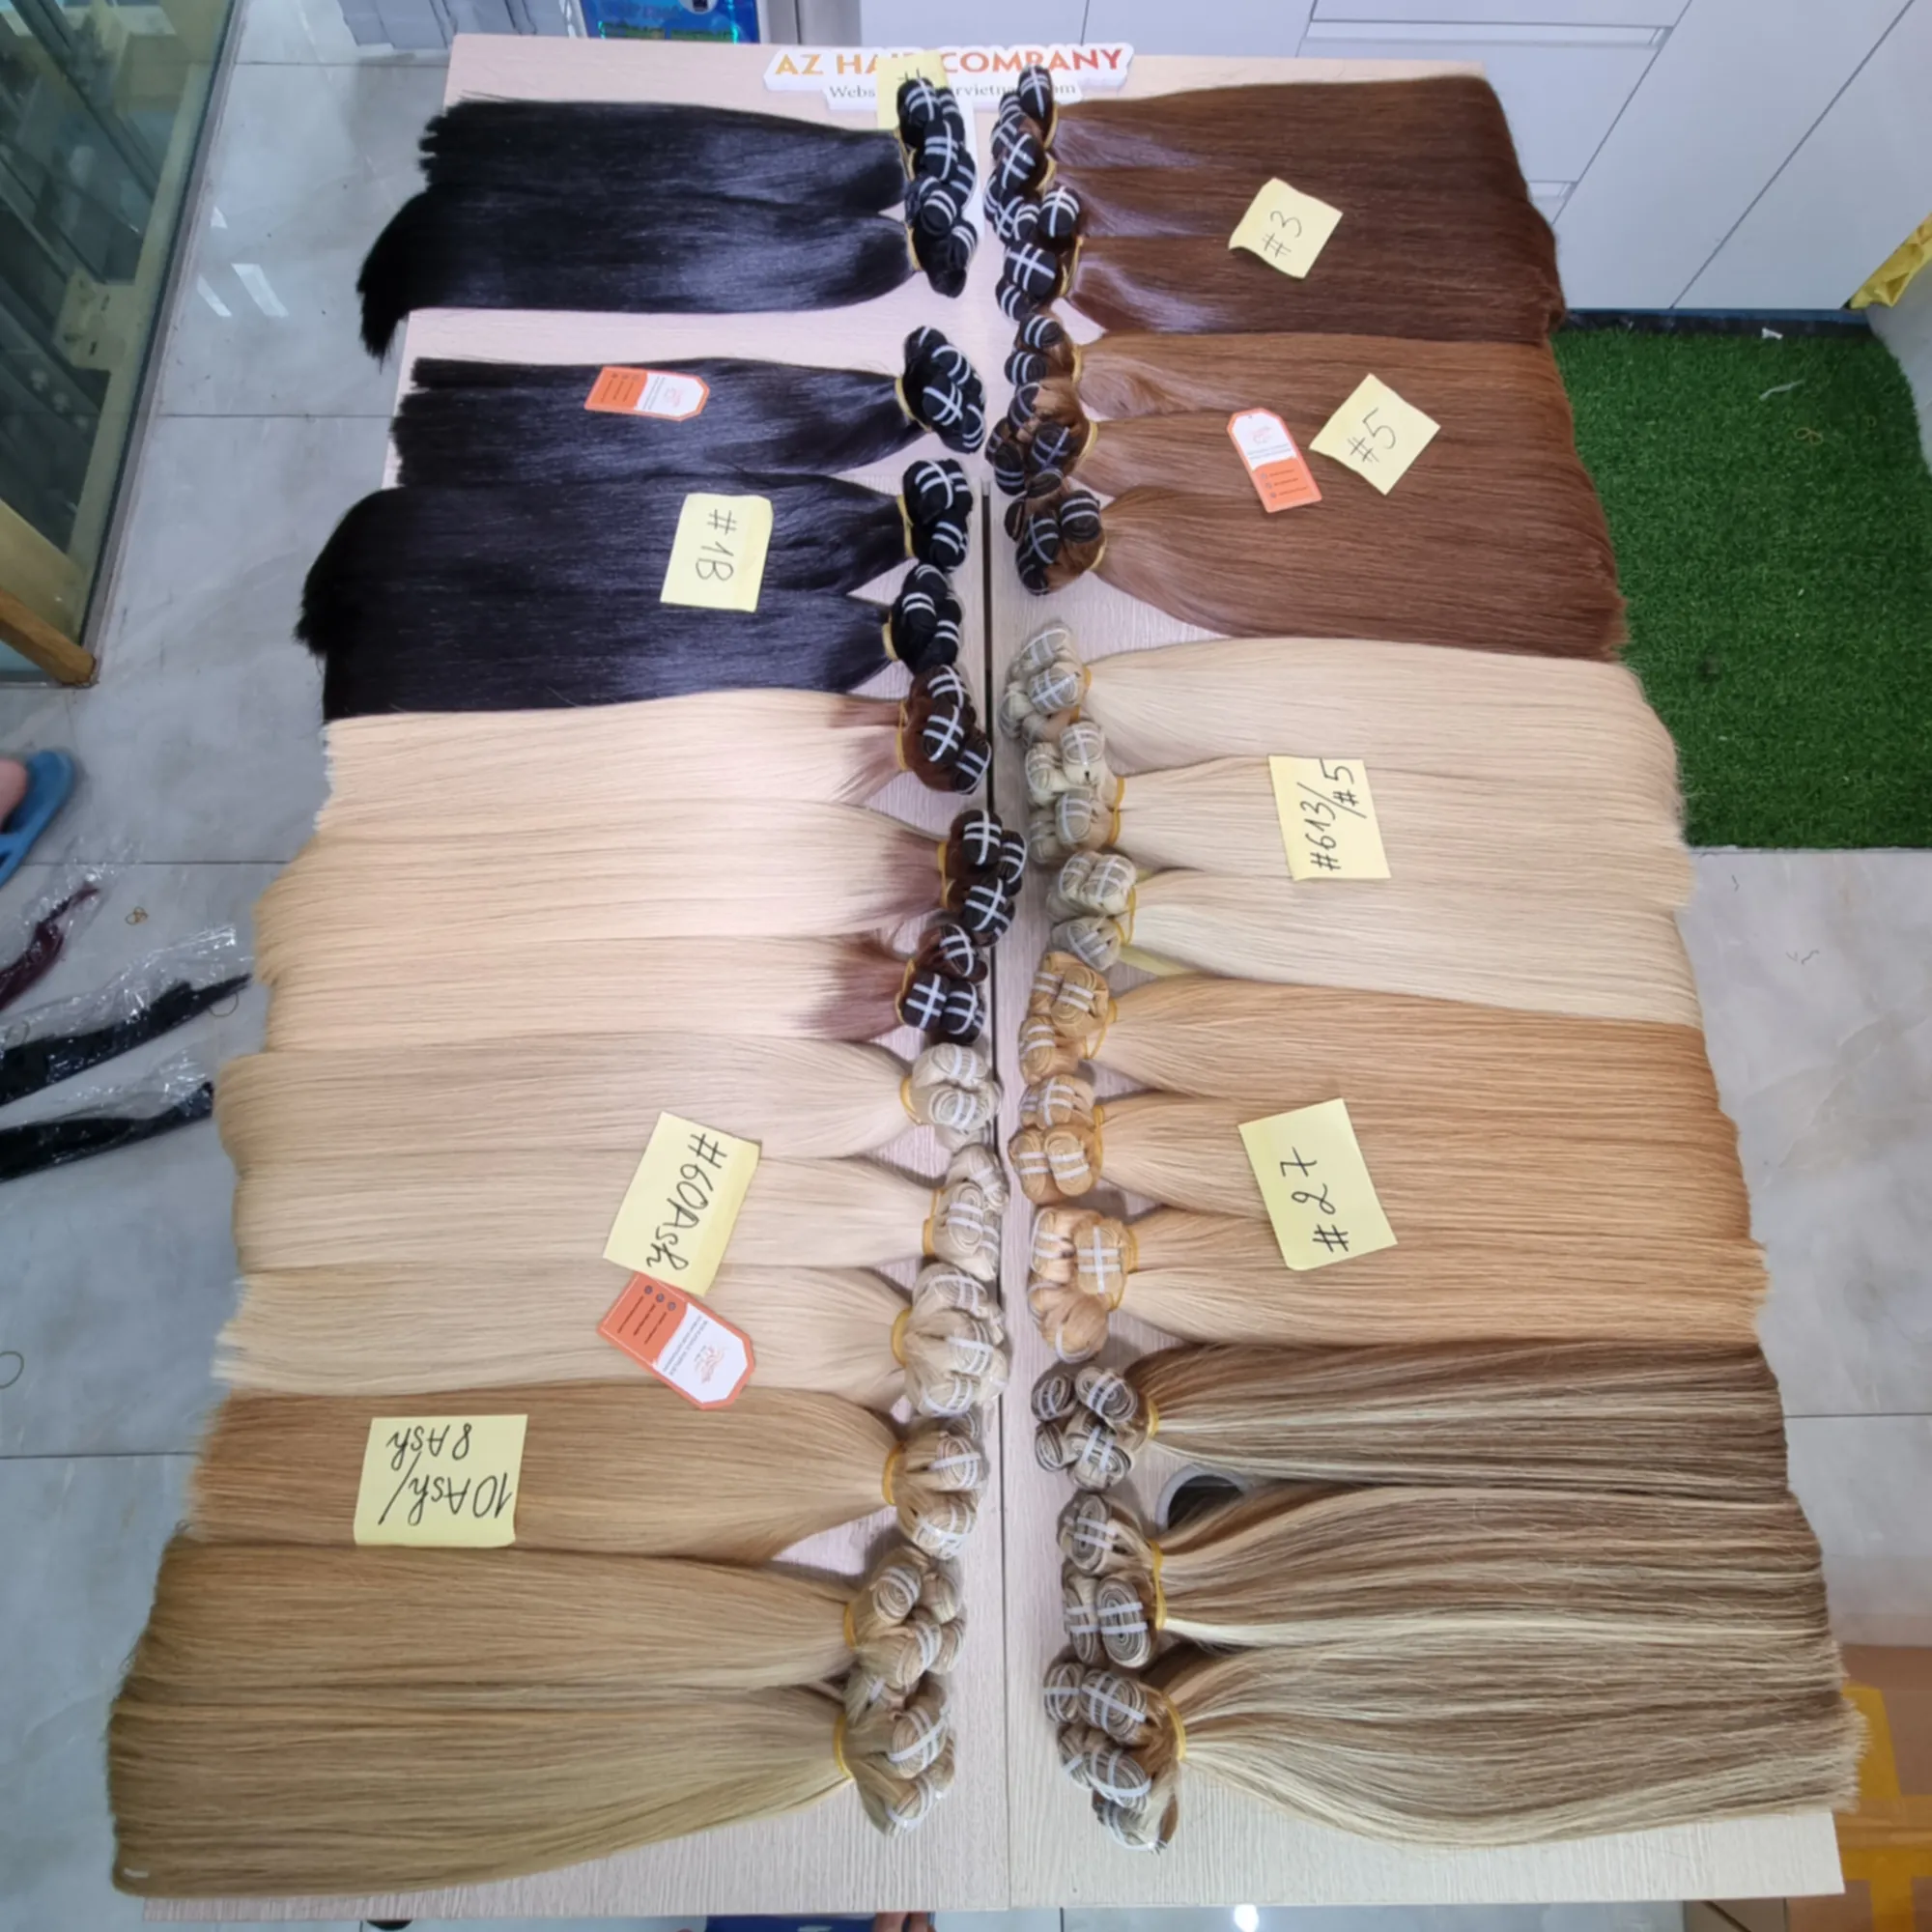 Top Quality Good 100% Human Hair Weave Hair Straights Extensions For Sale, Weft Hair Extensions Vietnamese